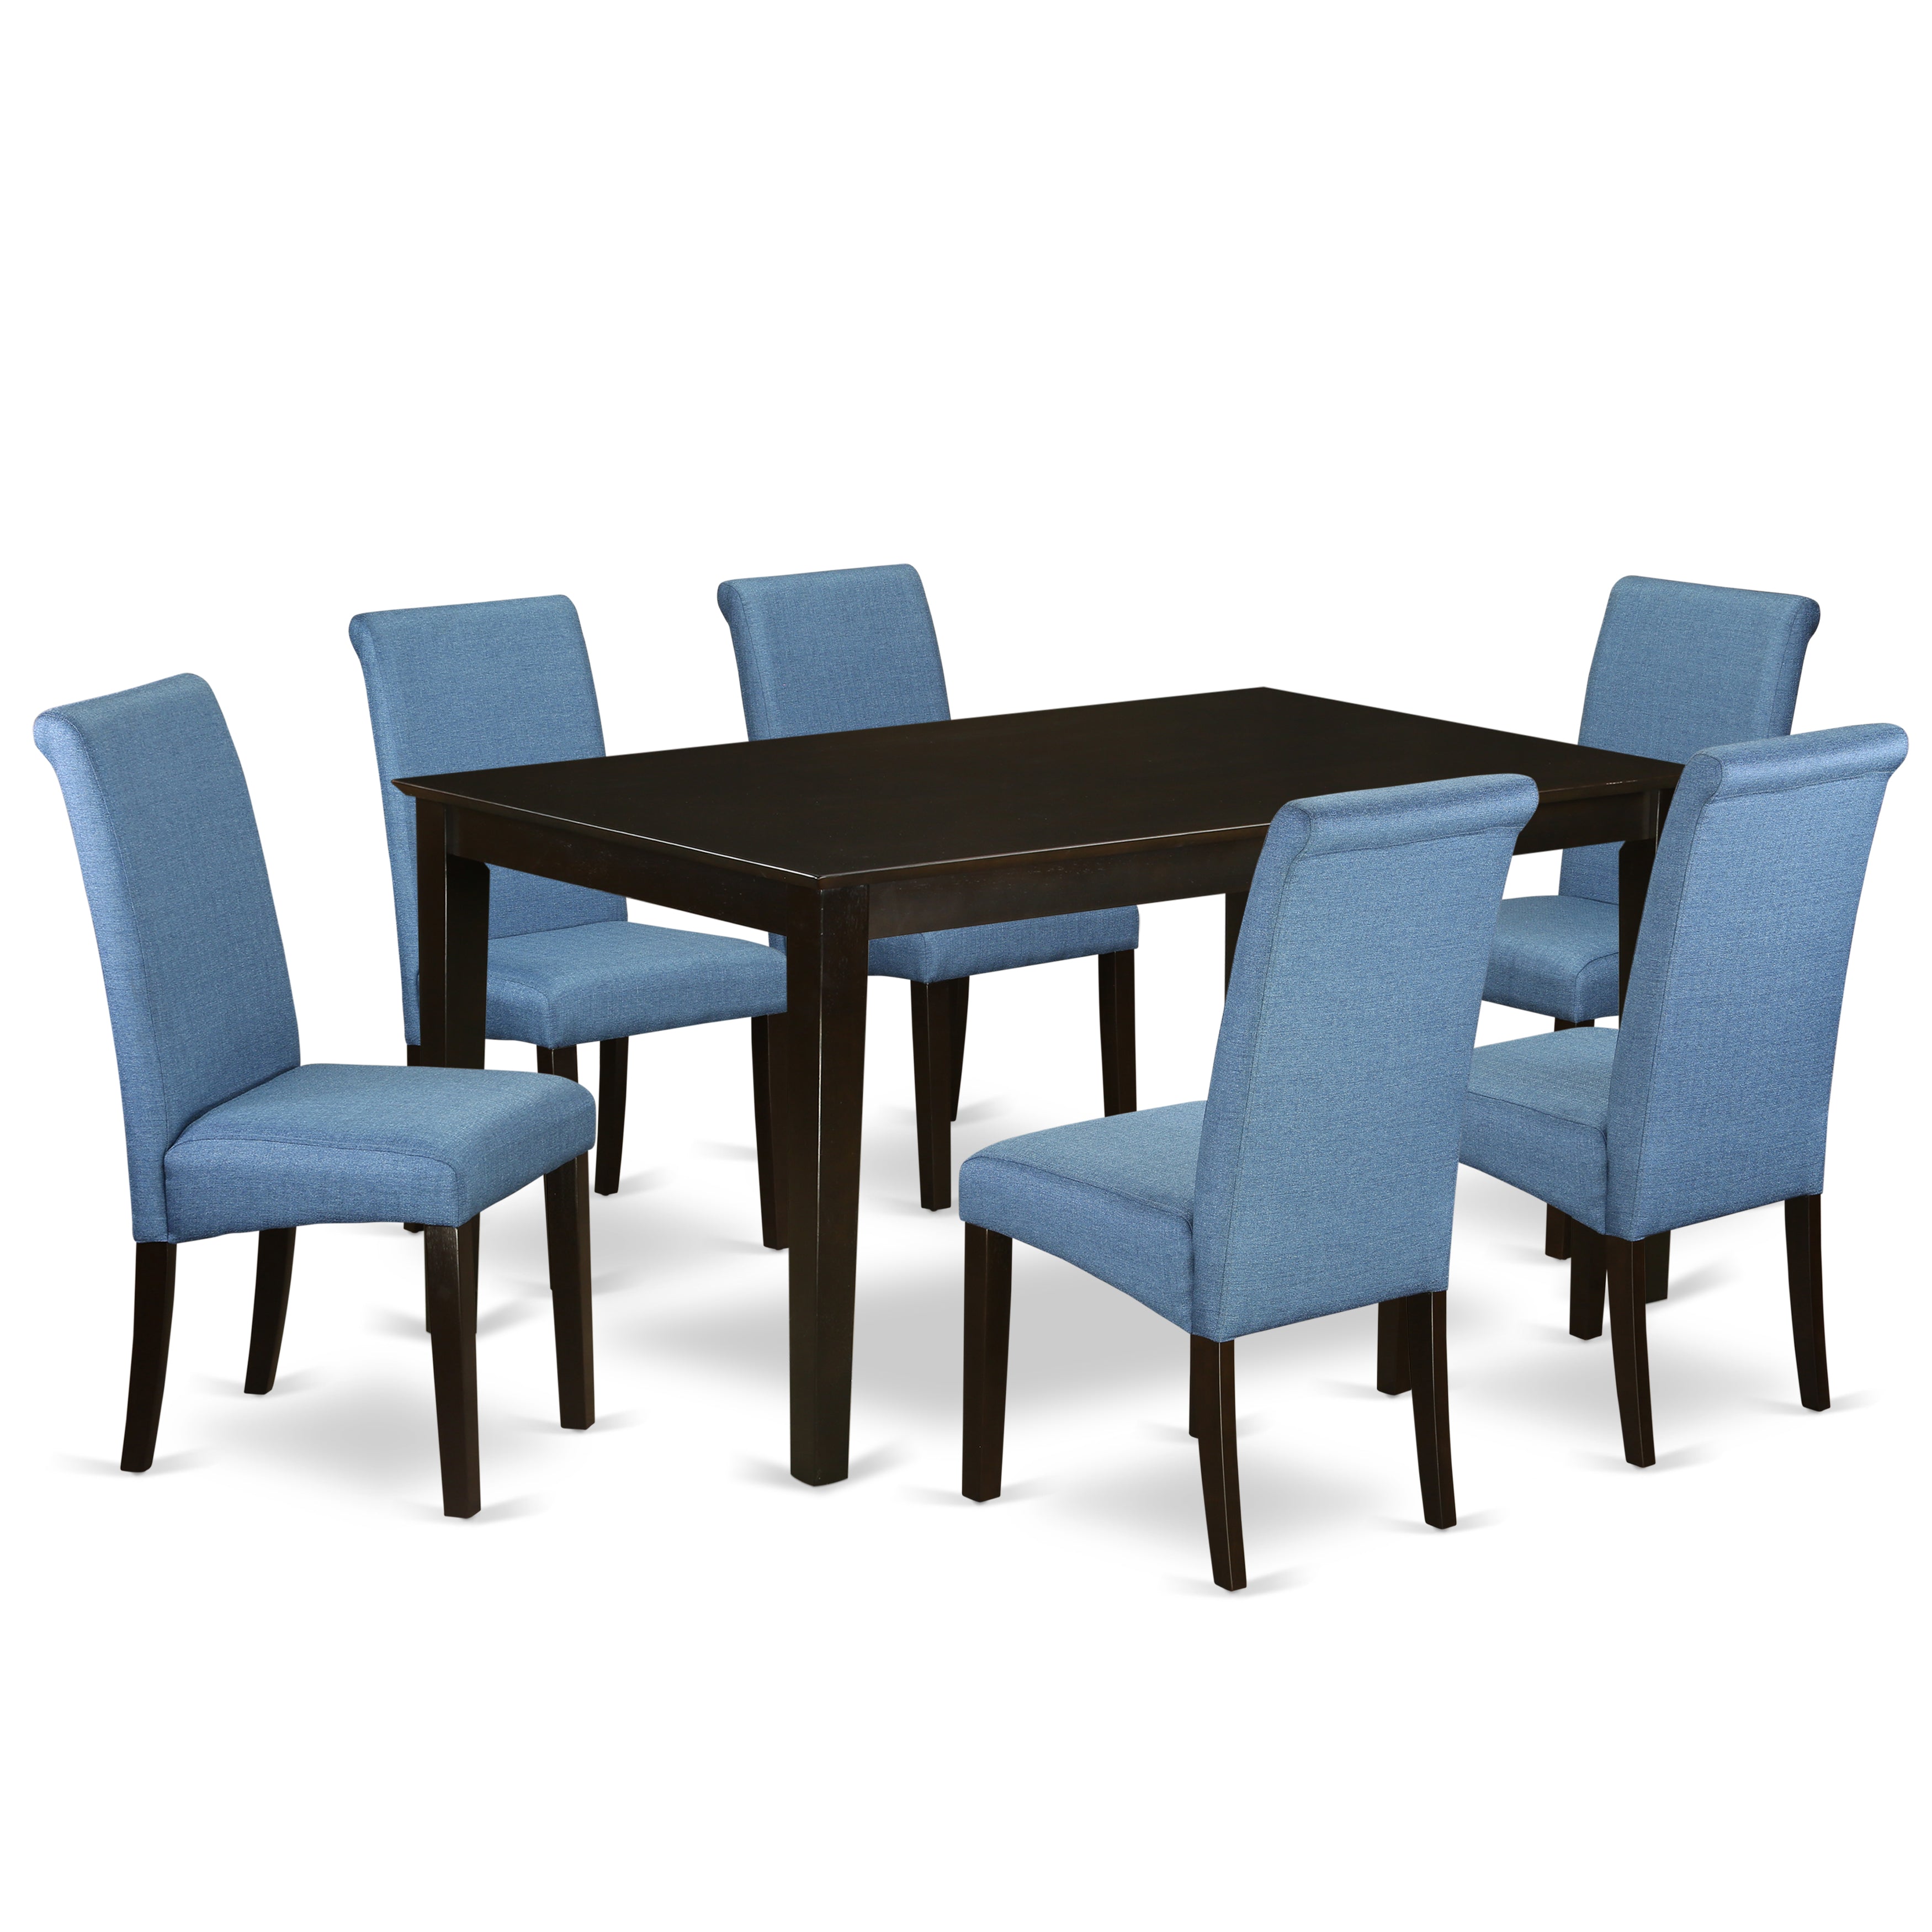 CABA7-CAP-21 7Pc Kitchen table with linen Blue fabric Parson chairs with cappuccino chair legs